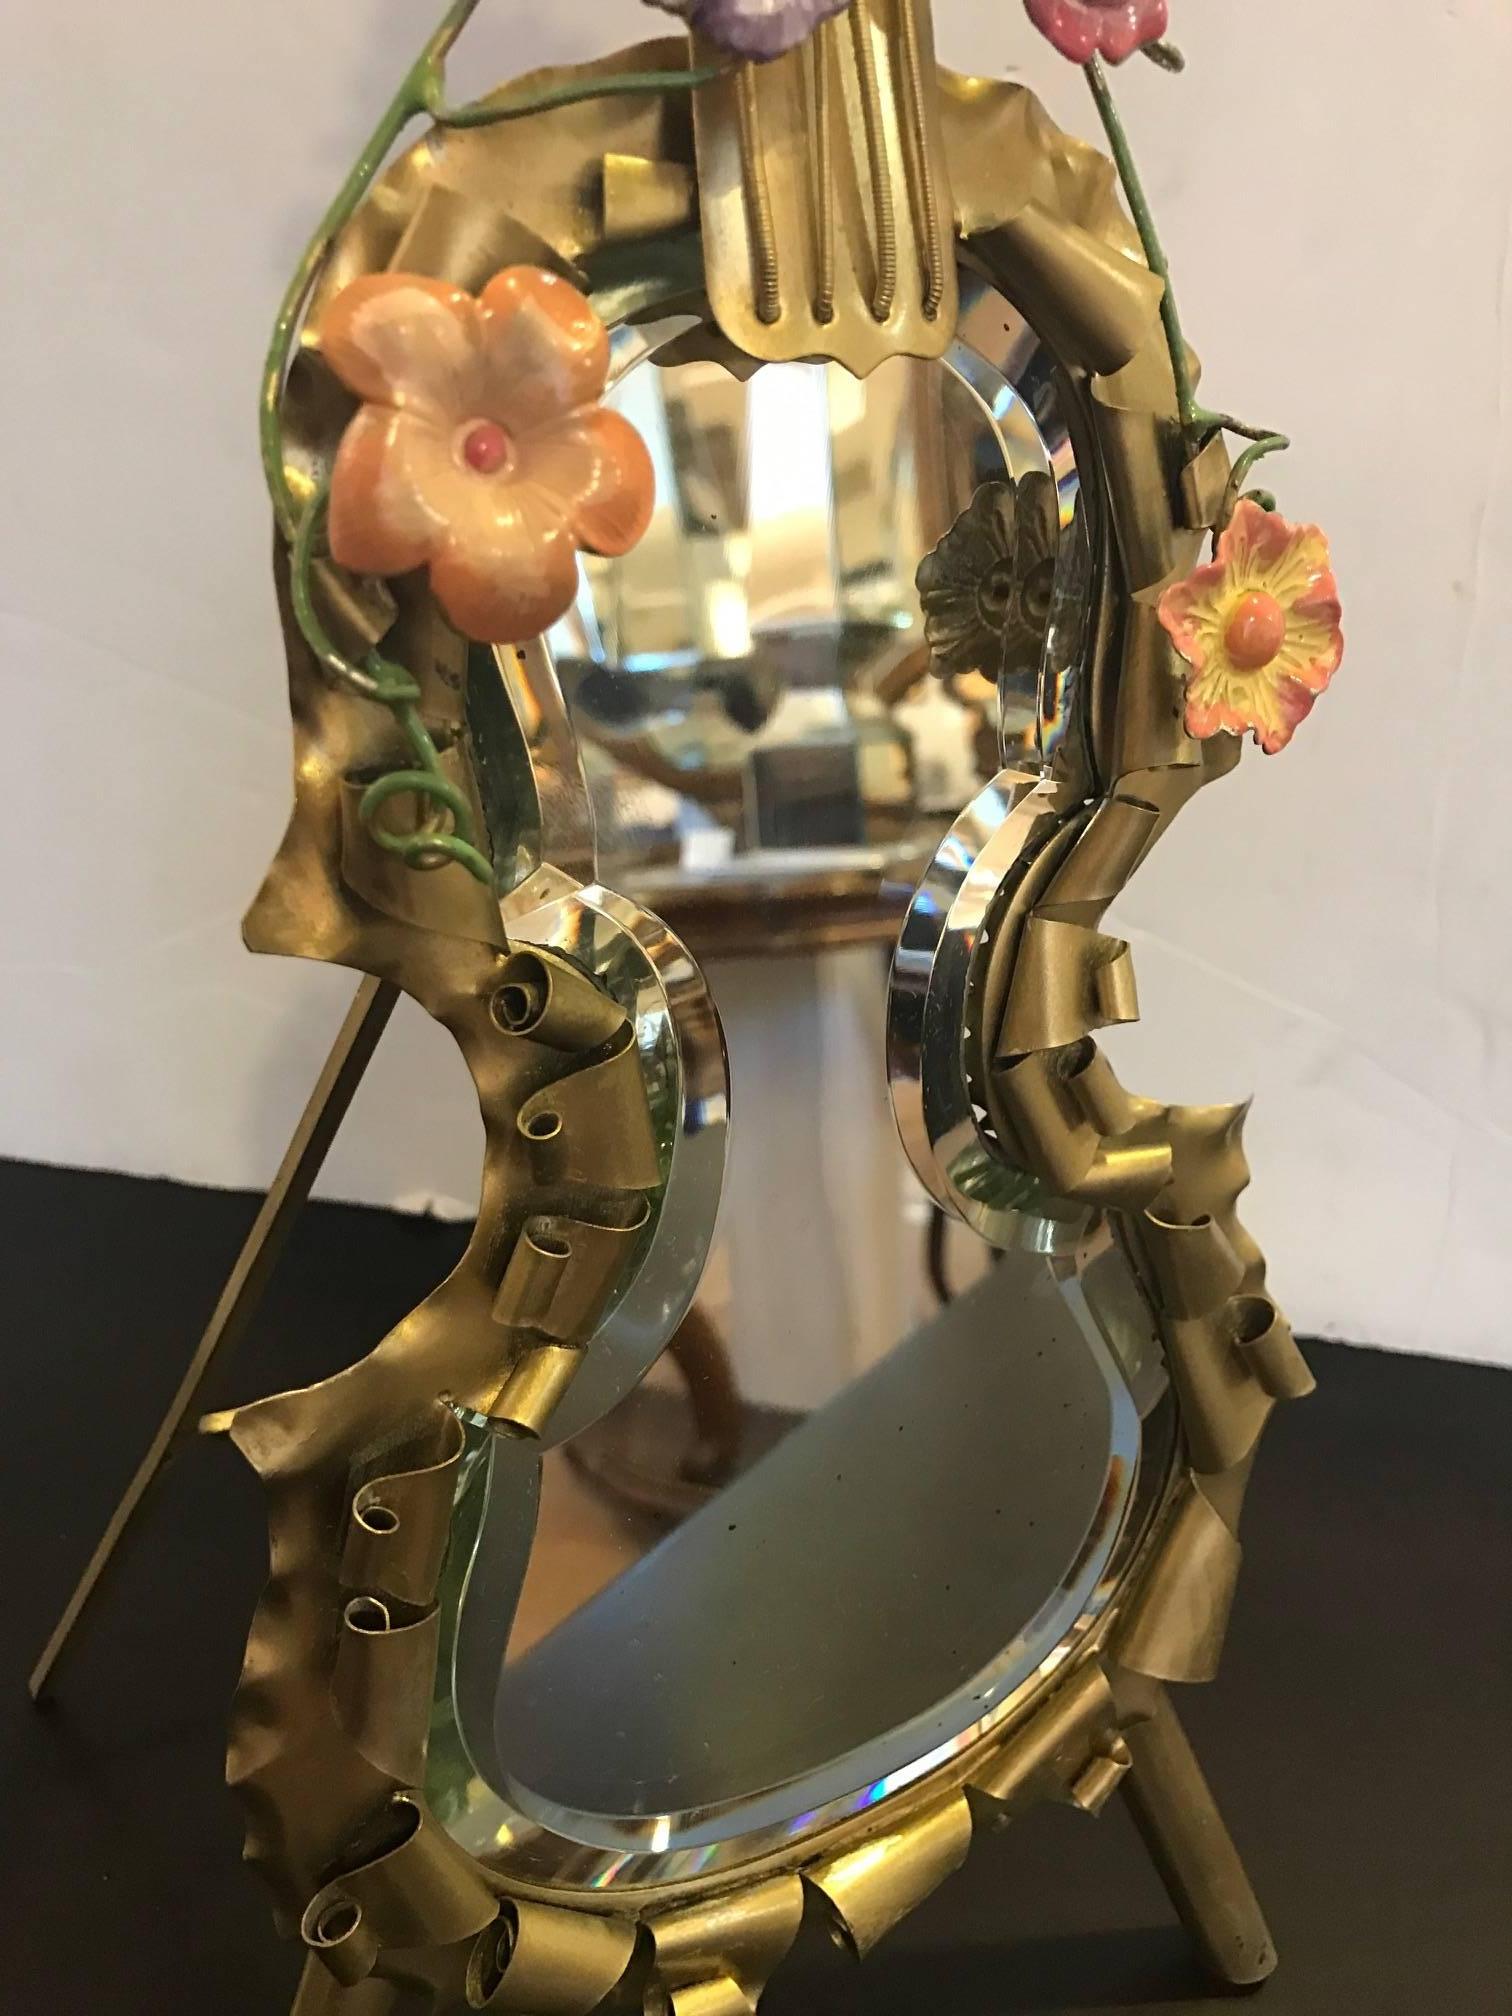 Whimsical violin motif standing mirror. The handmade frame with gilt brass covered in hand-turned curls and enameled bird and flowers applied to the frame. The hand beveled mirror is original and has very minor age spots.